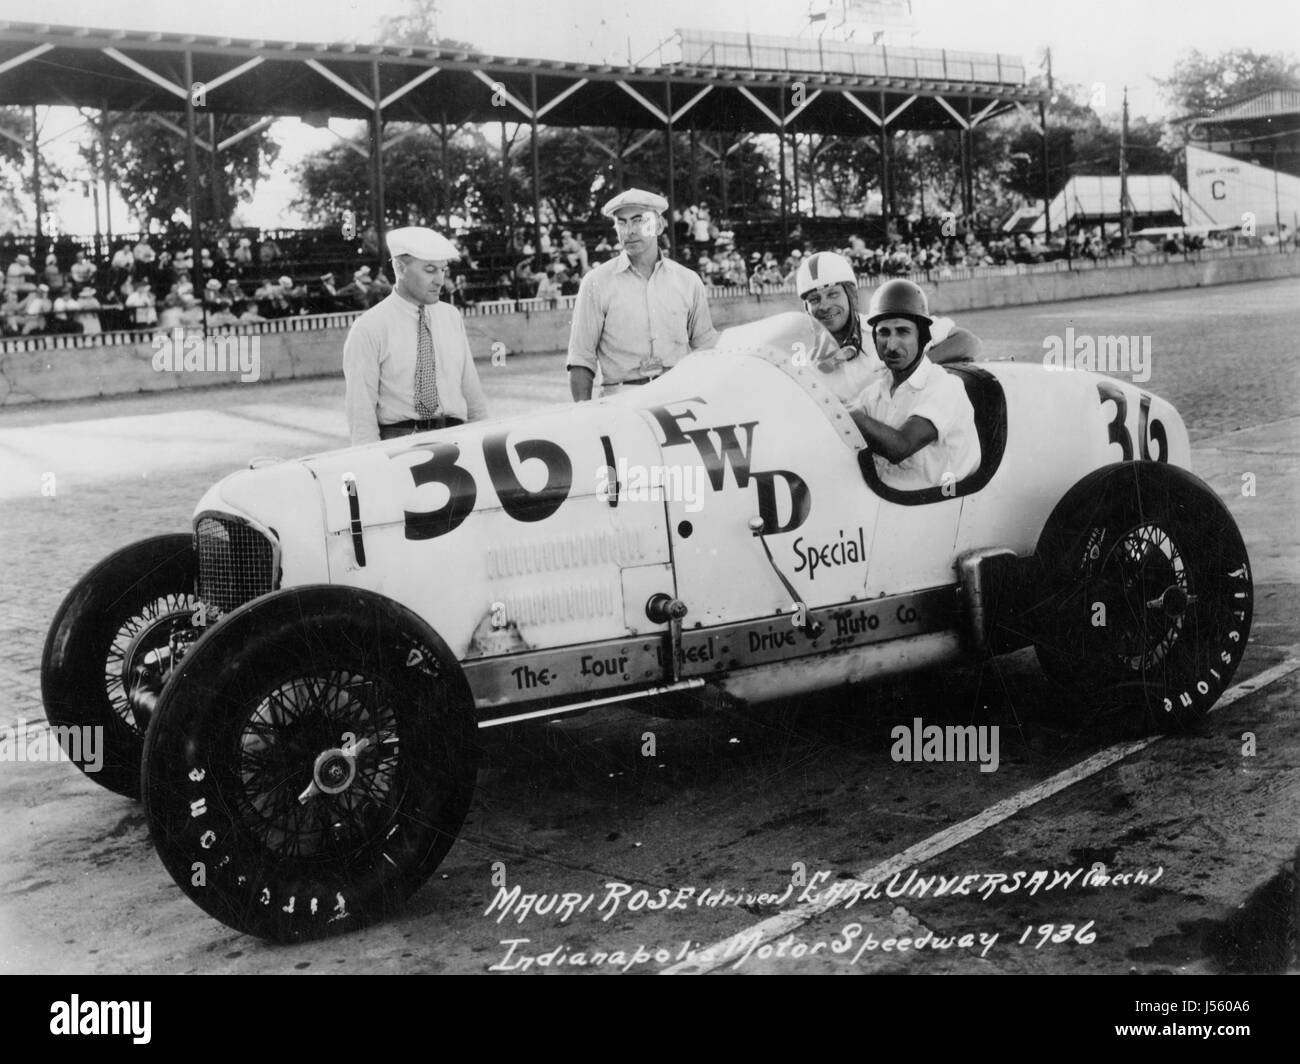 Mauri Rose and mechanic Earl Unversaw in Milller at Indianapolis 1936 Stock Photo